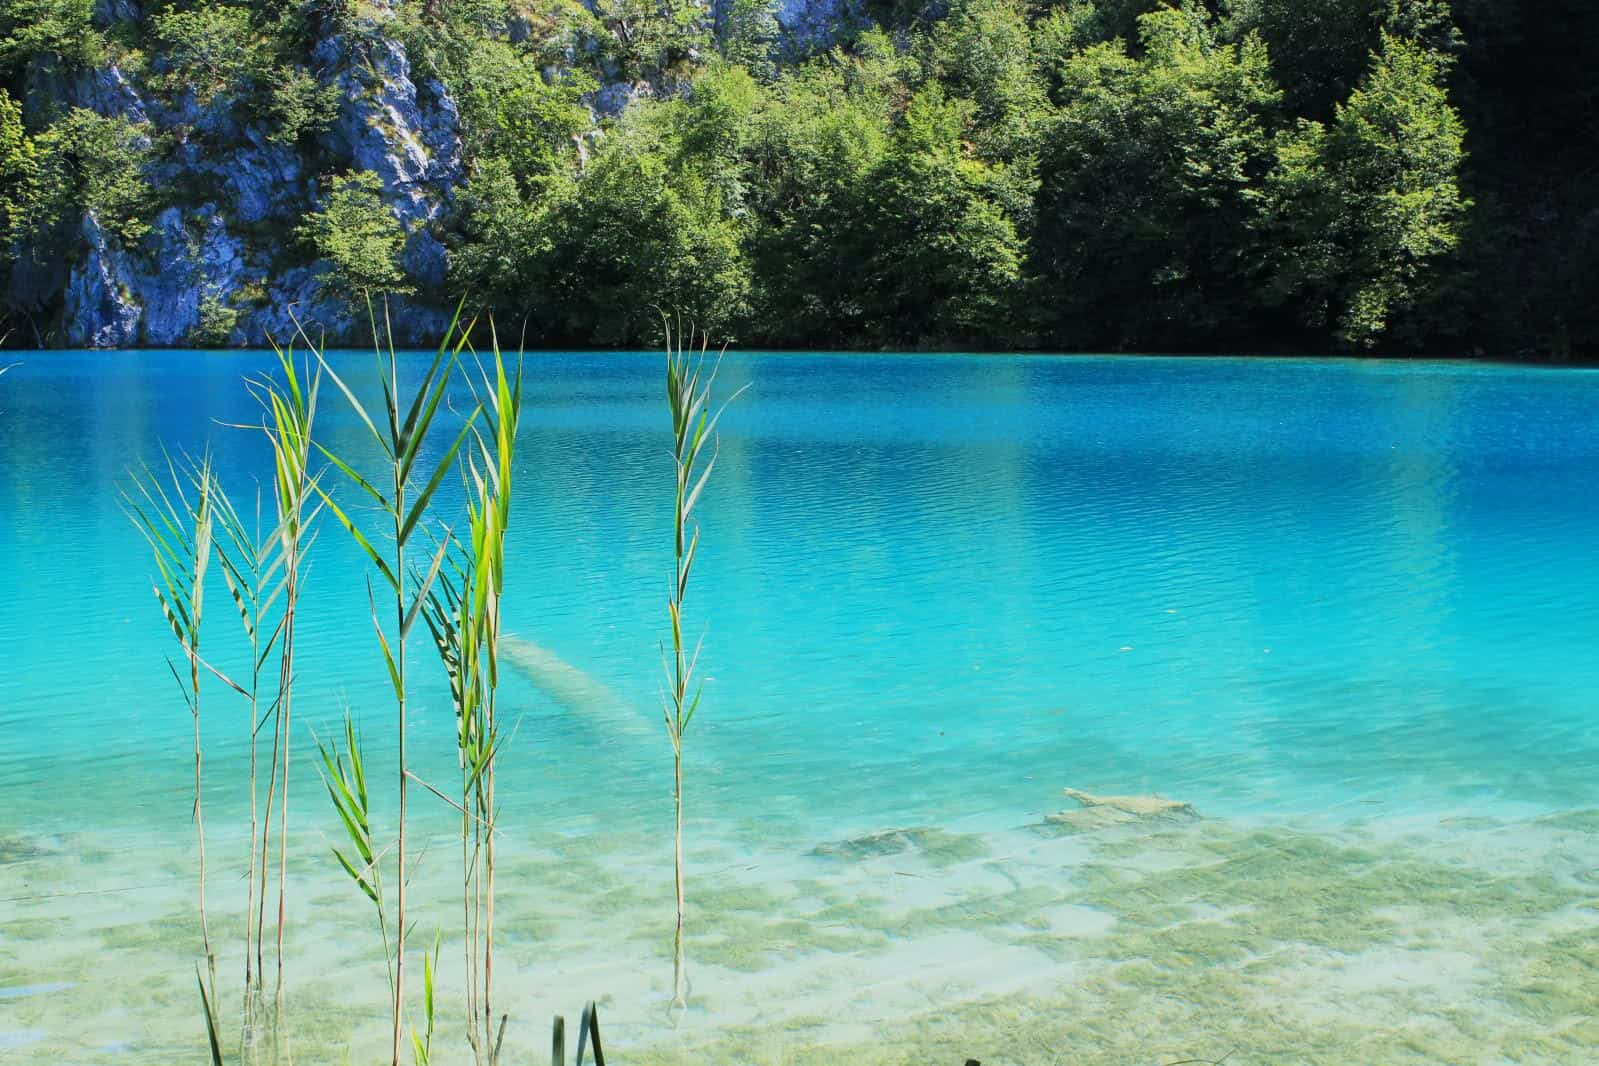 Turquoise coloured lake at Plitvice Lakes in Croatia, with trees and cliff in the background